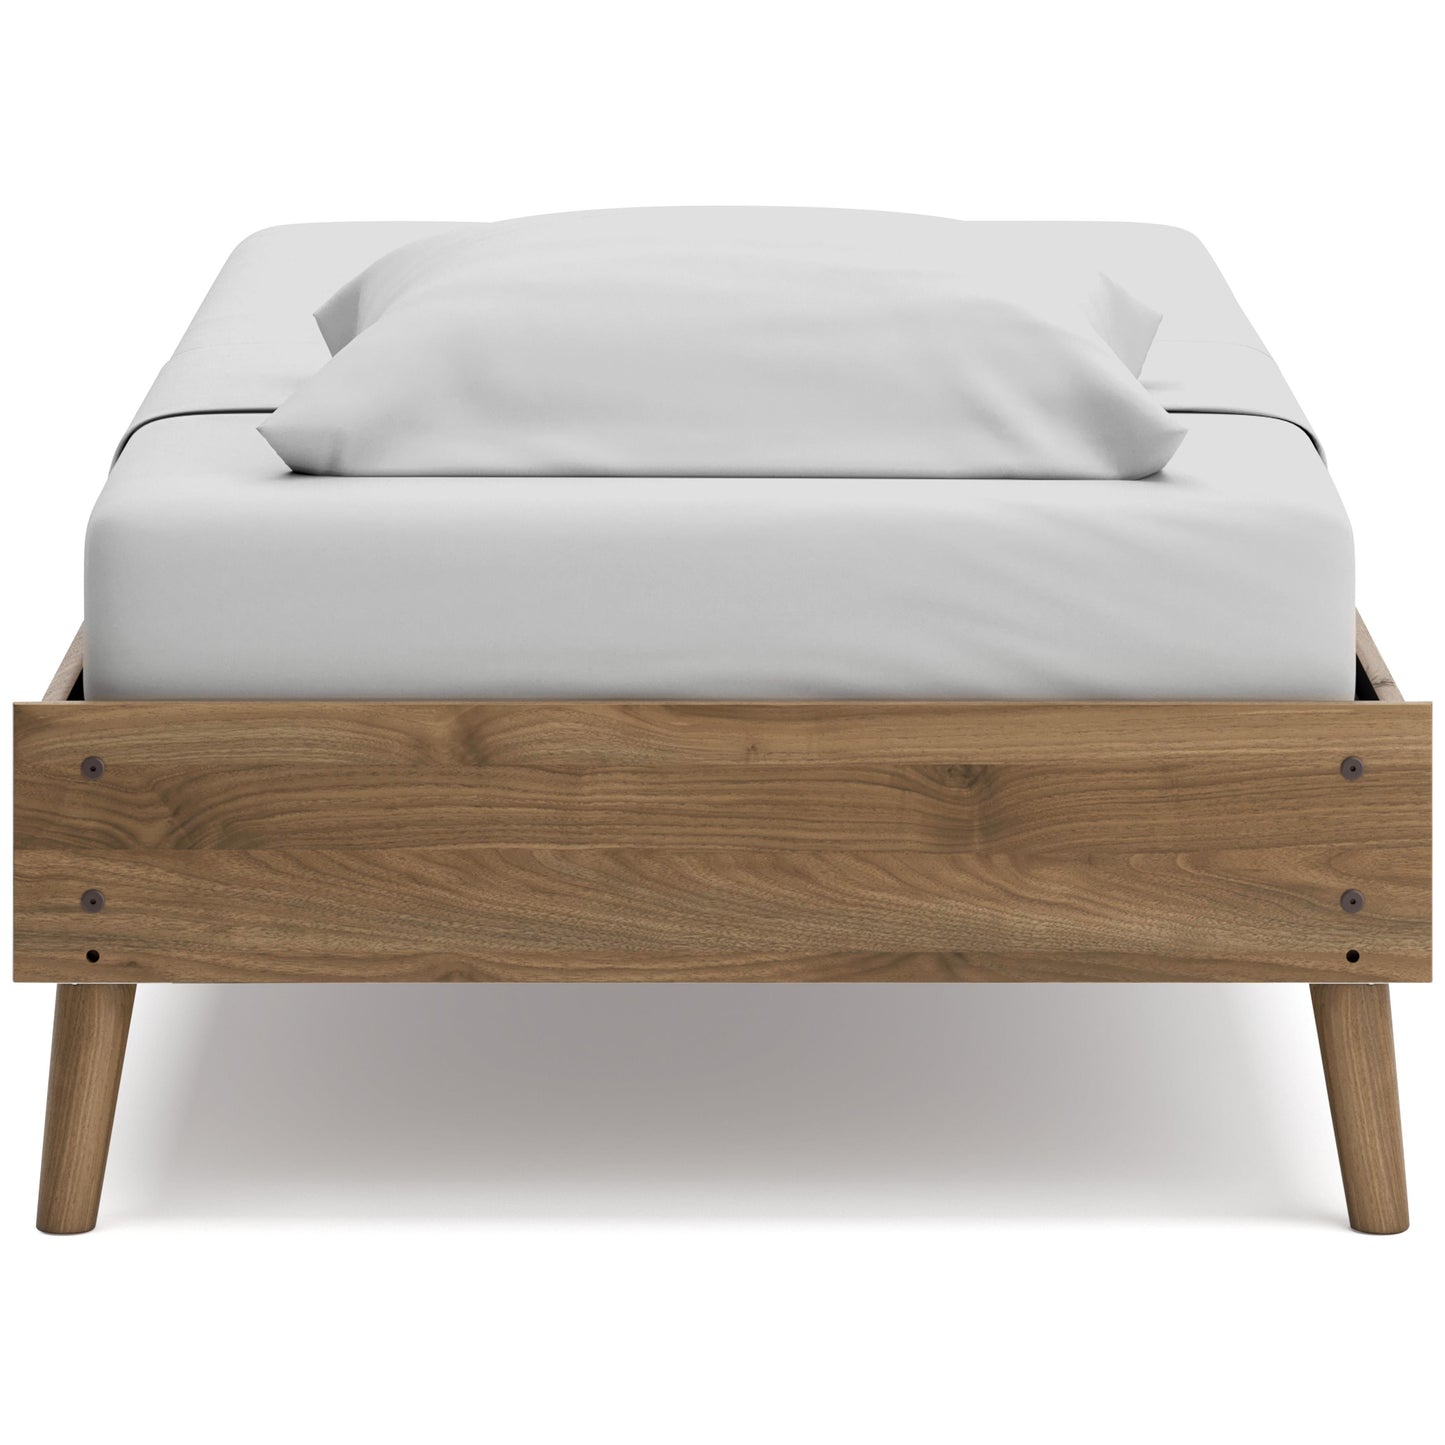 Signature Design by Ashley Kids Beds Bed EB1187-111 IMAGE 4